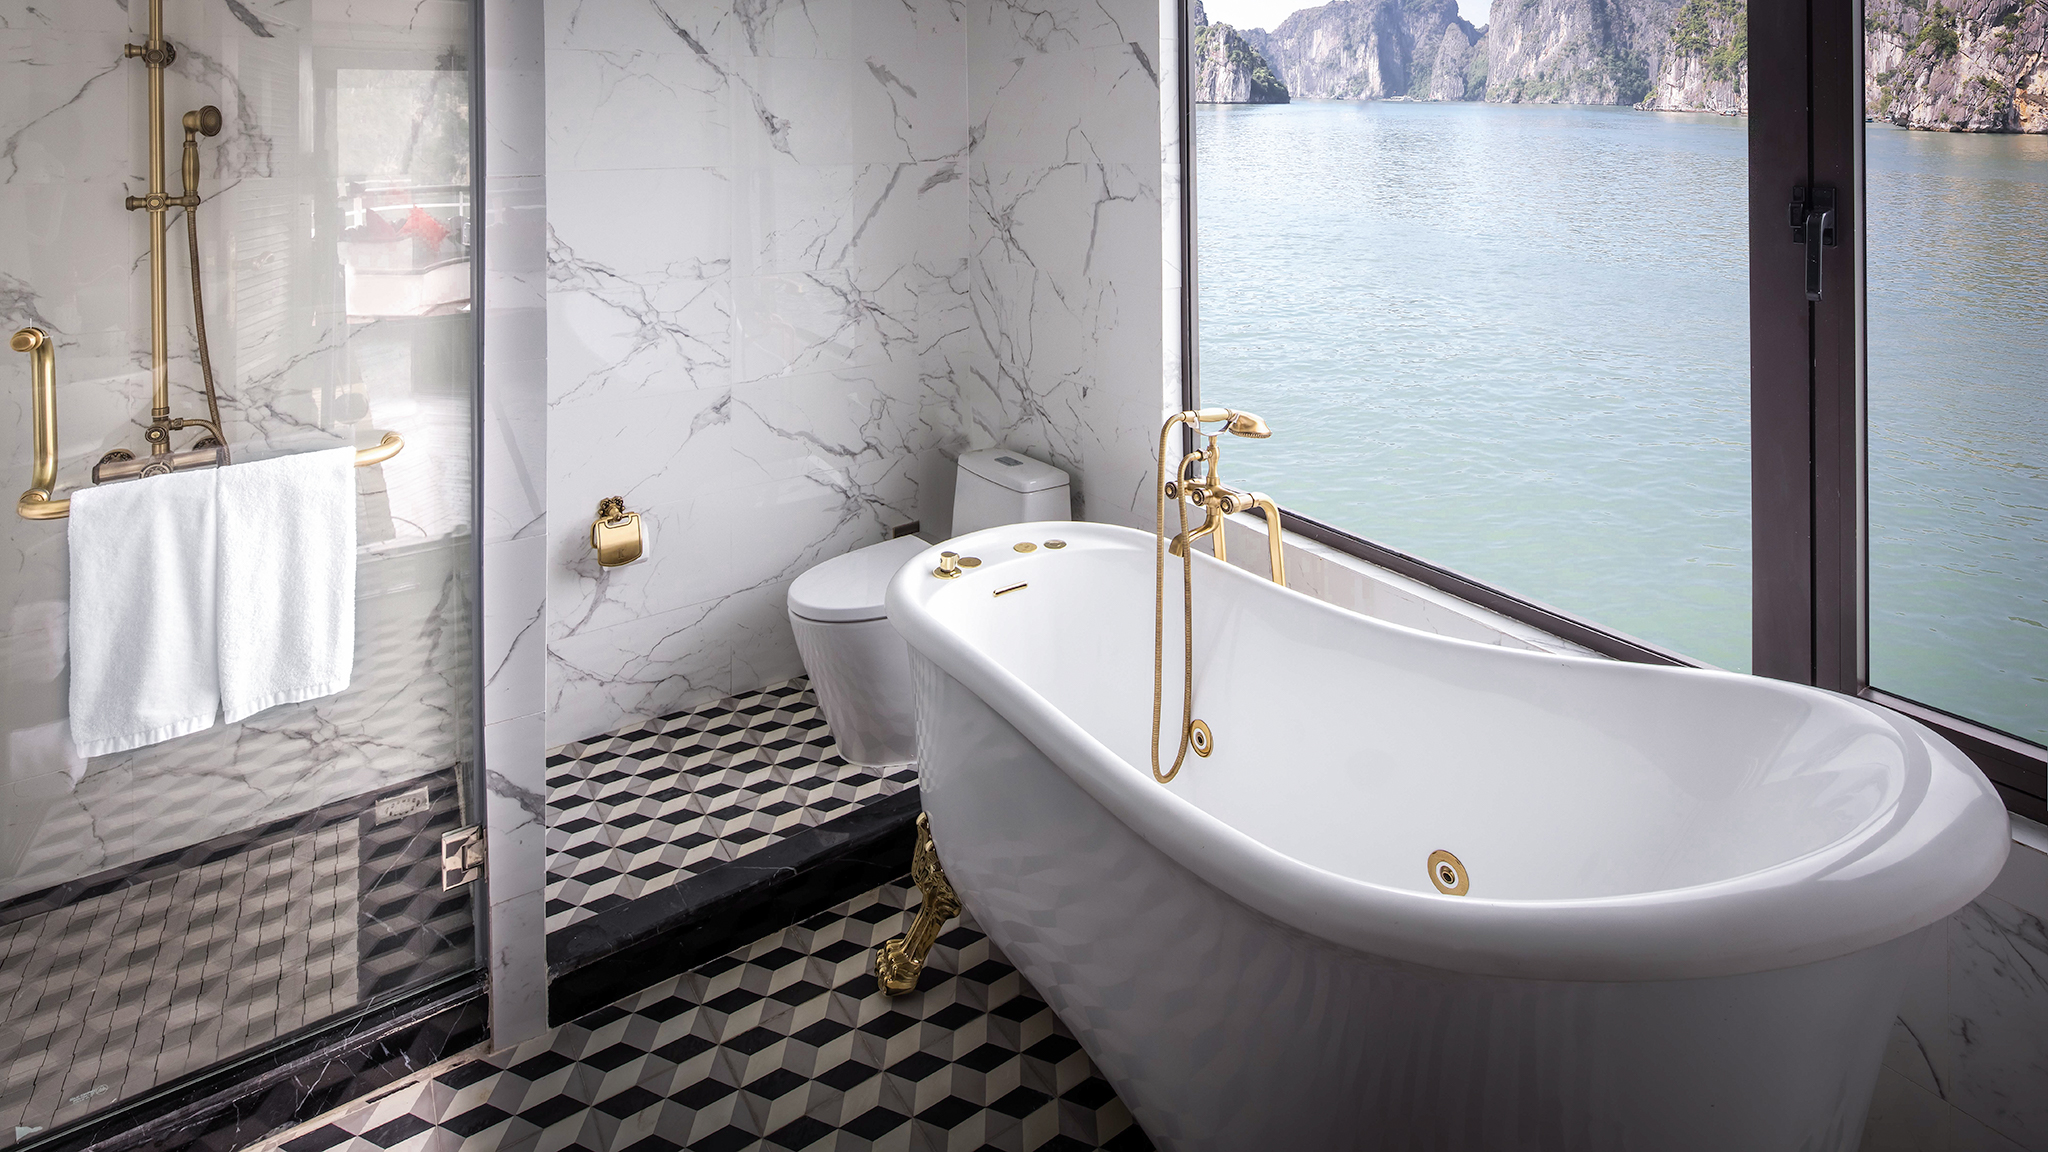 Relax in bathtub and admire the beauty of Halong Bay